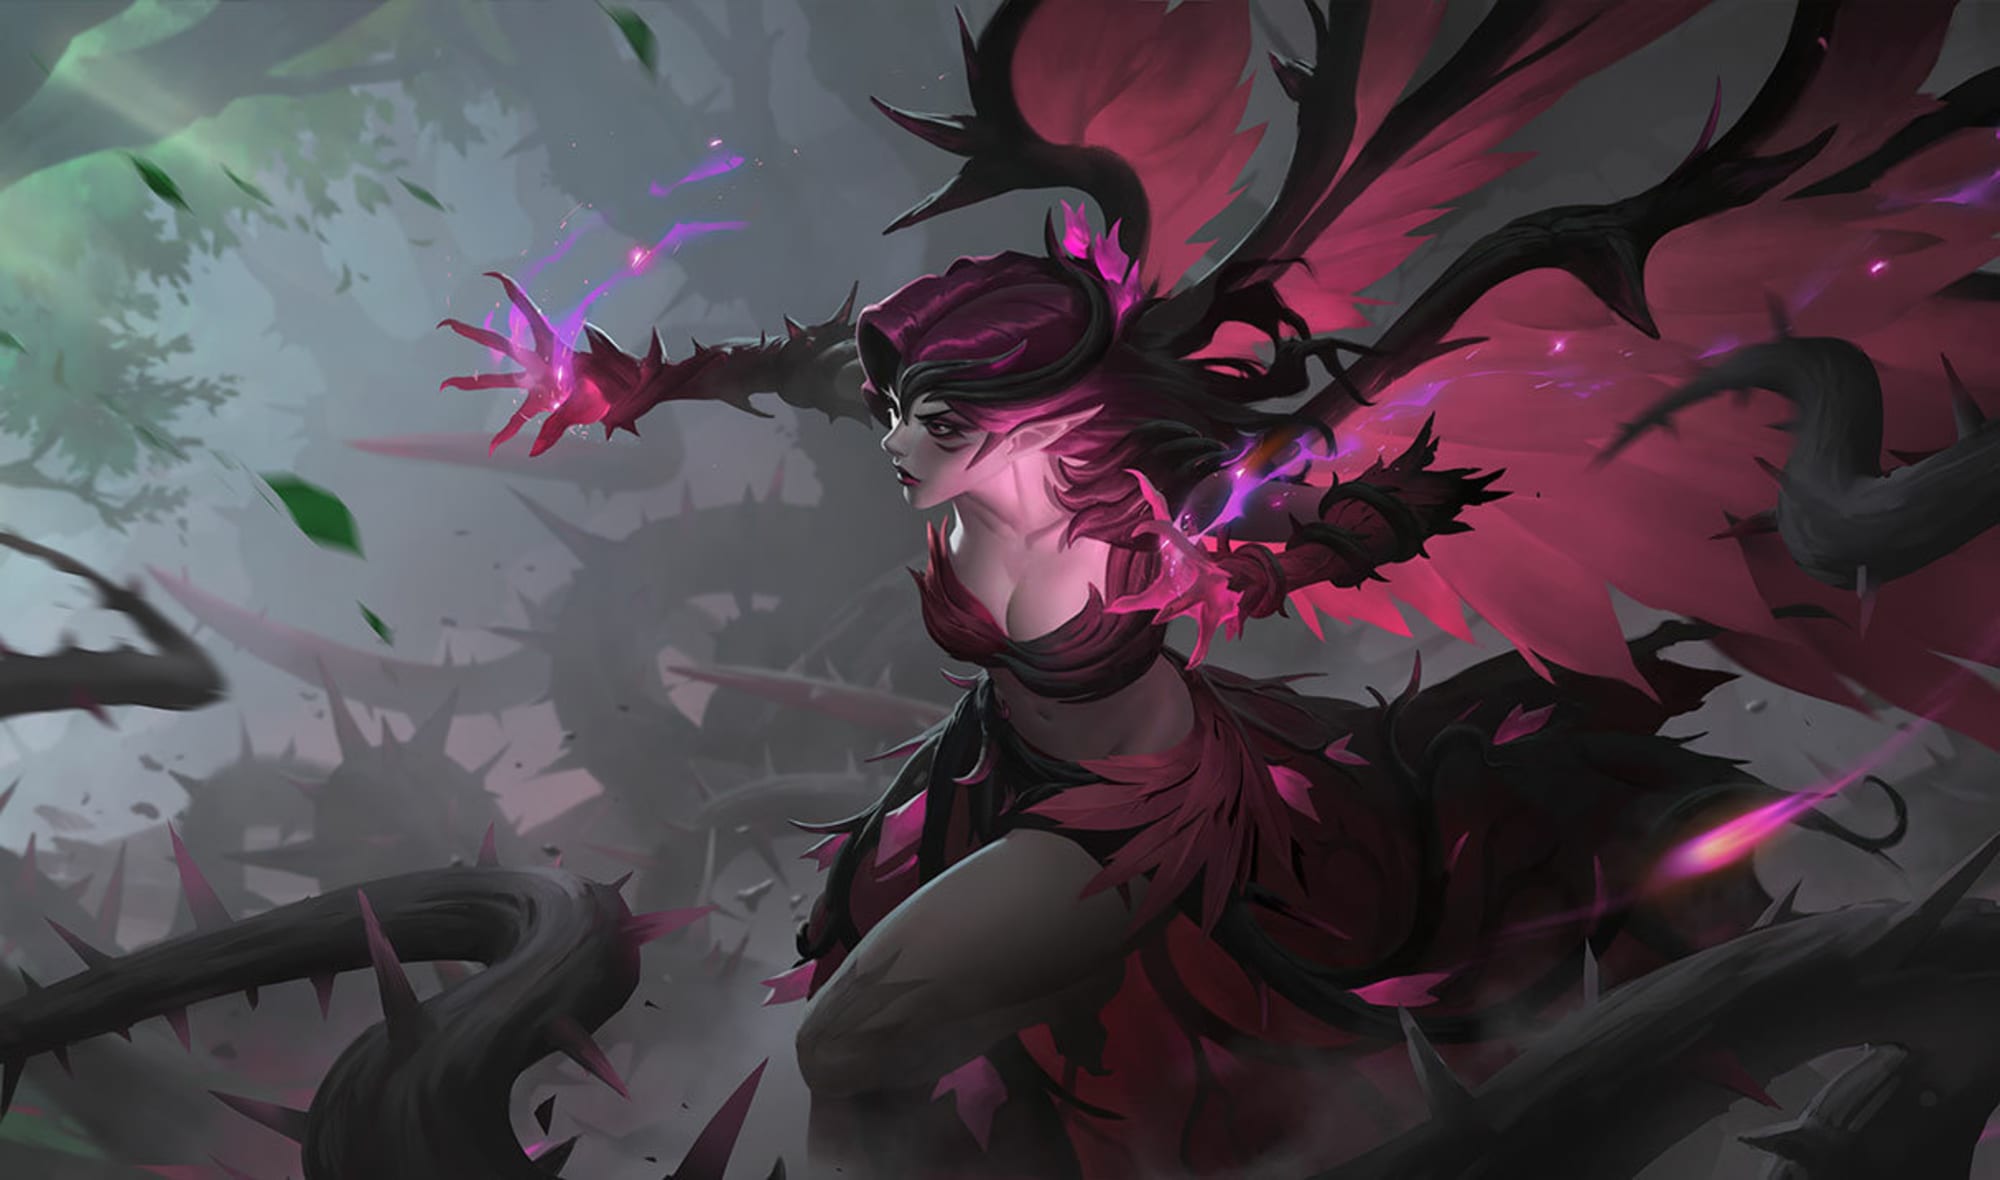 New batch of Coven skins coming to LoL next month, Riot confirms